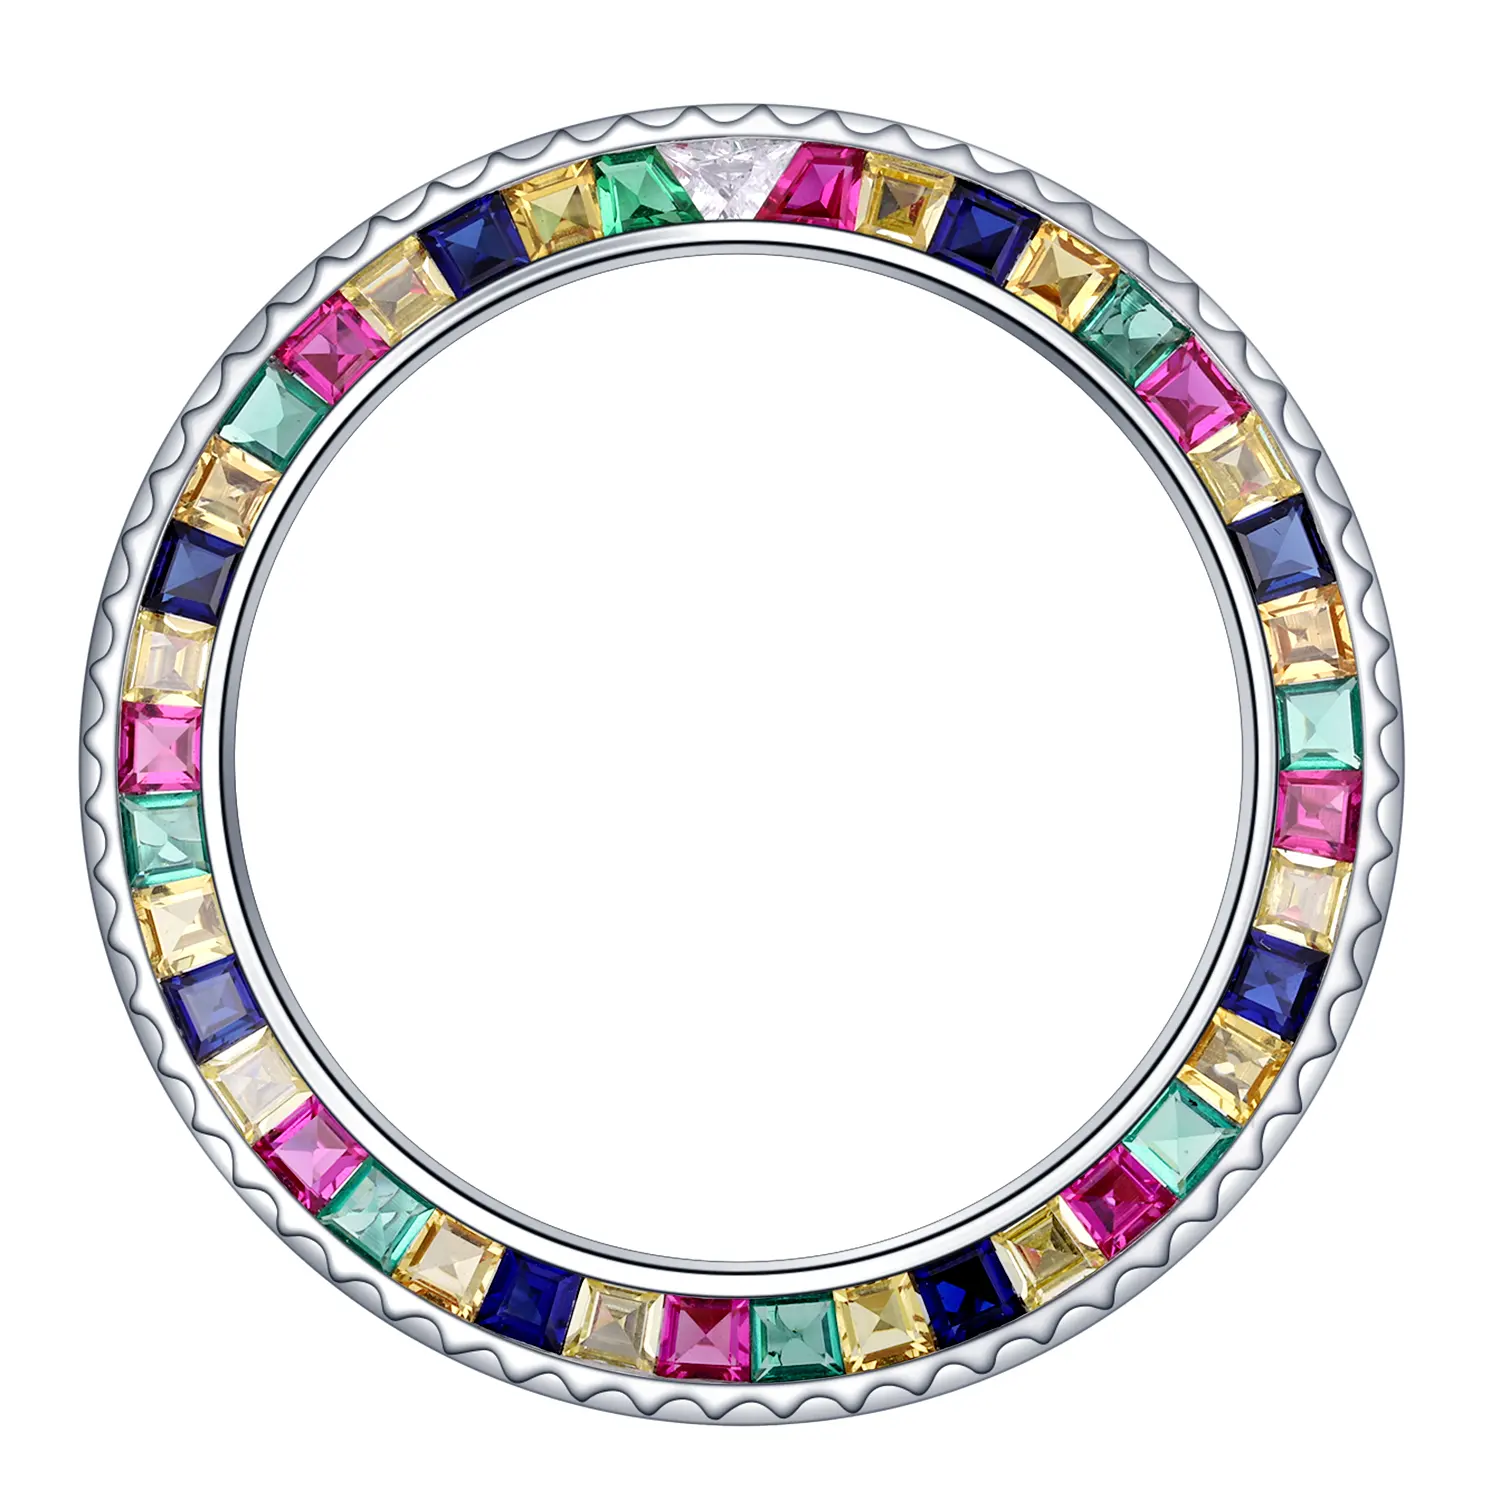 Precision-cut Suitable for bezel with an outer diameter of 40mm Steel/9k/18k rose gold+Synthetic Gems/sapphires/Natural Stone